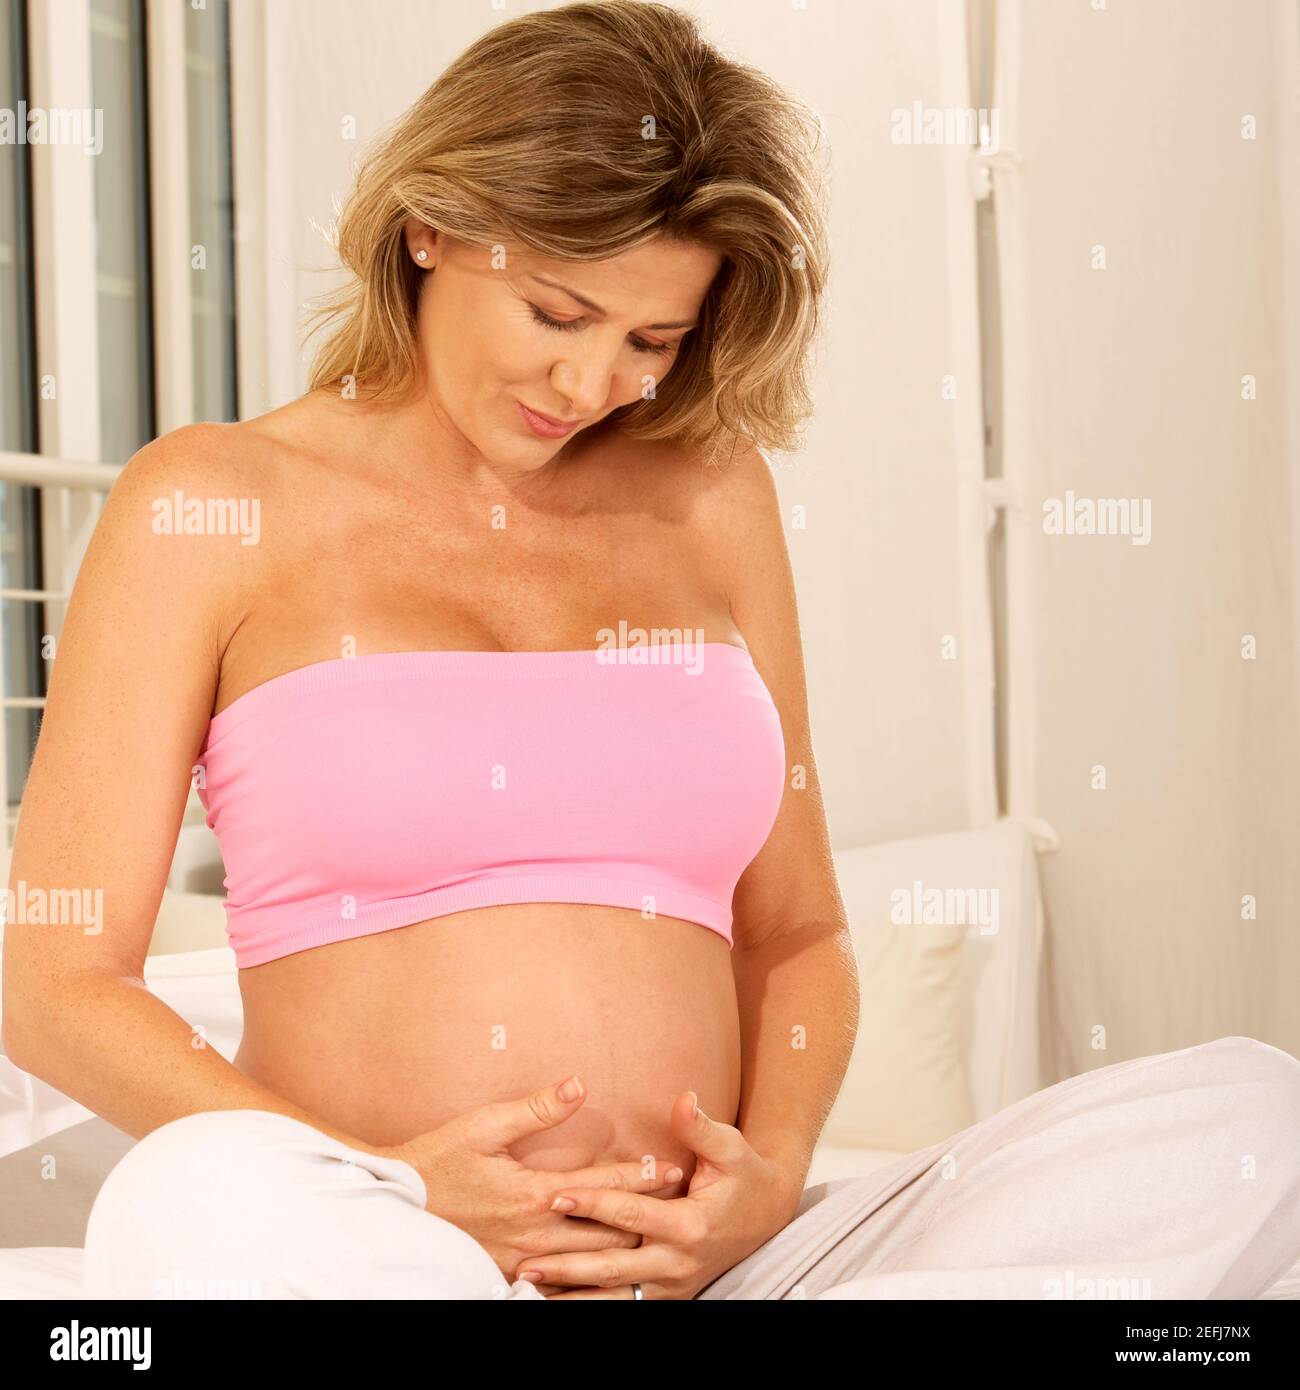 Pregnant woman sitting on the bed touching her abdomen Stock Photo